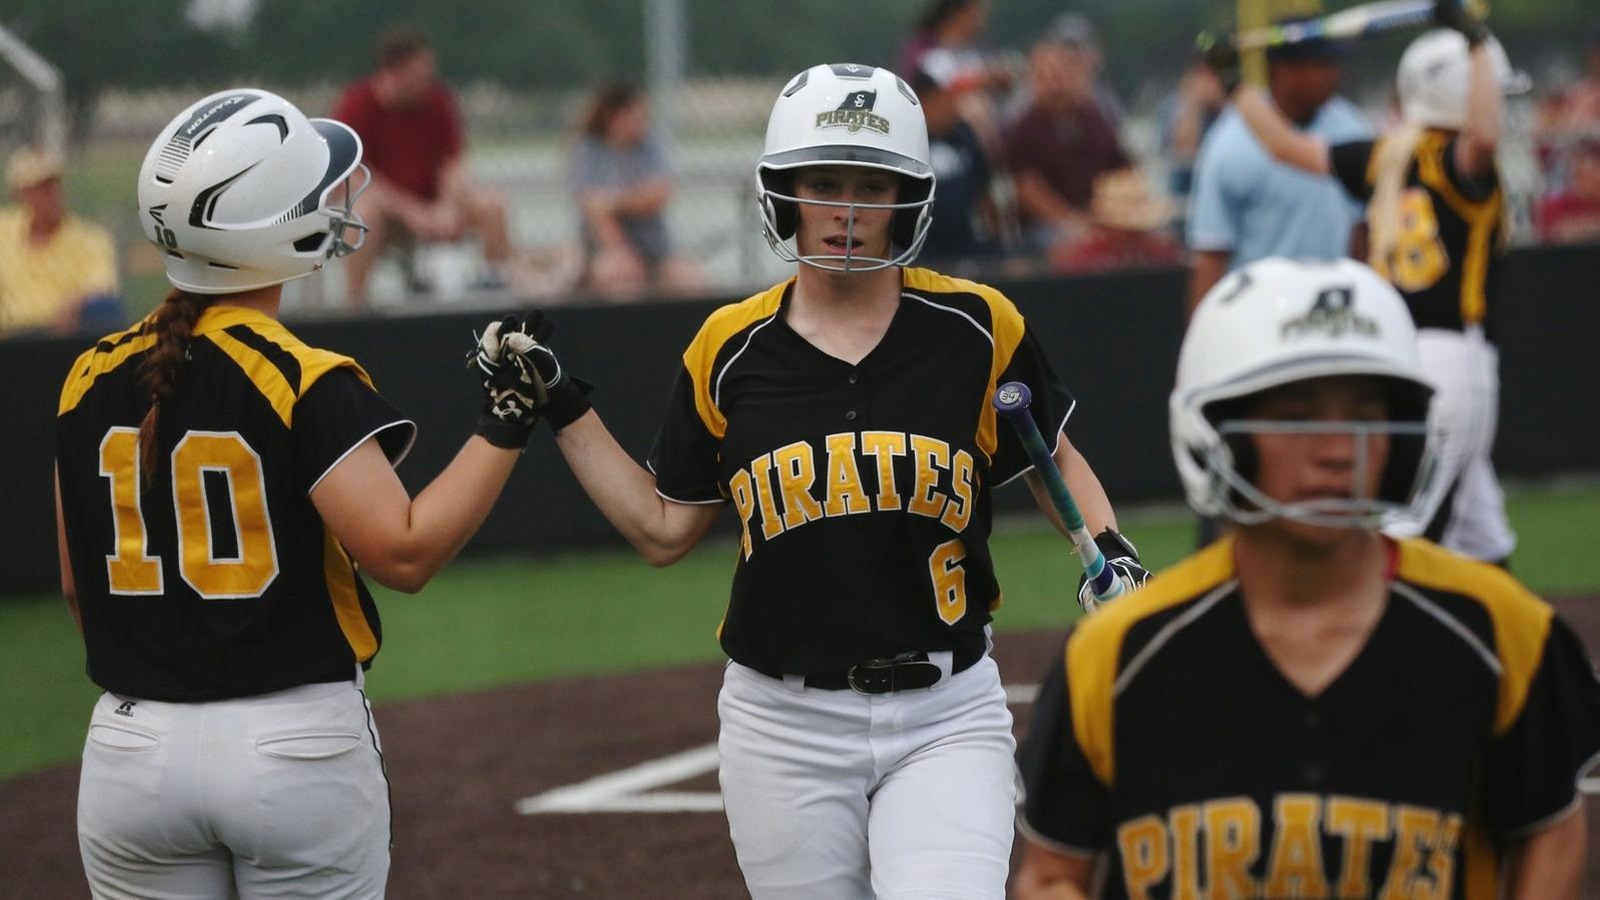 Pirates advance to championship game with win over Trinity